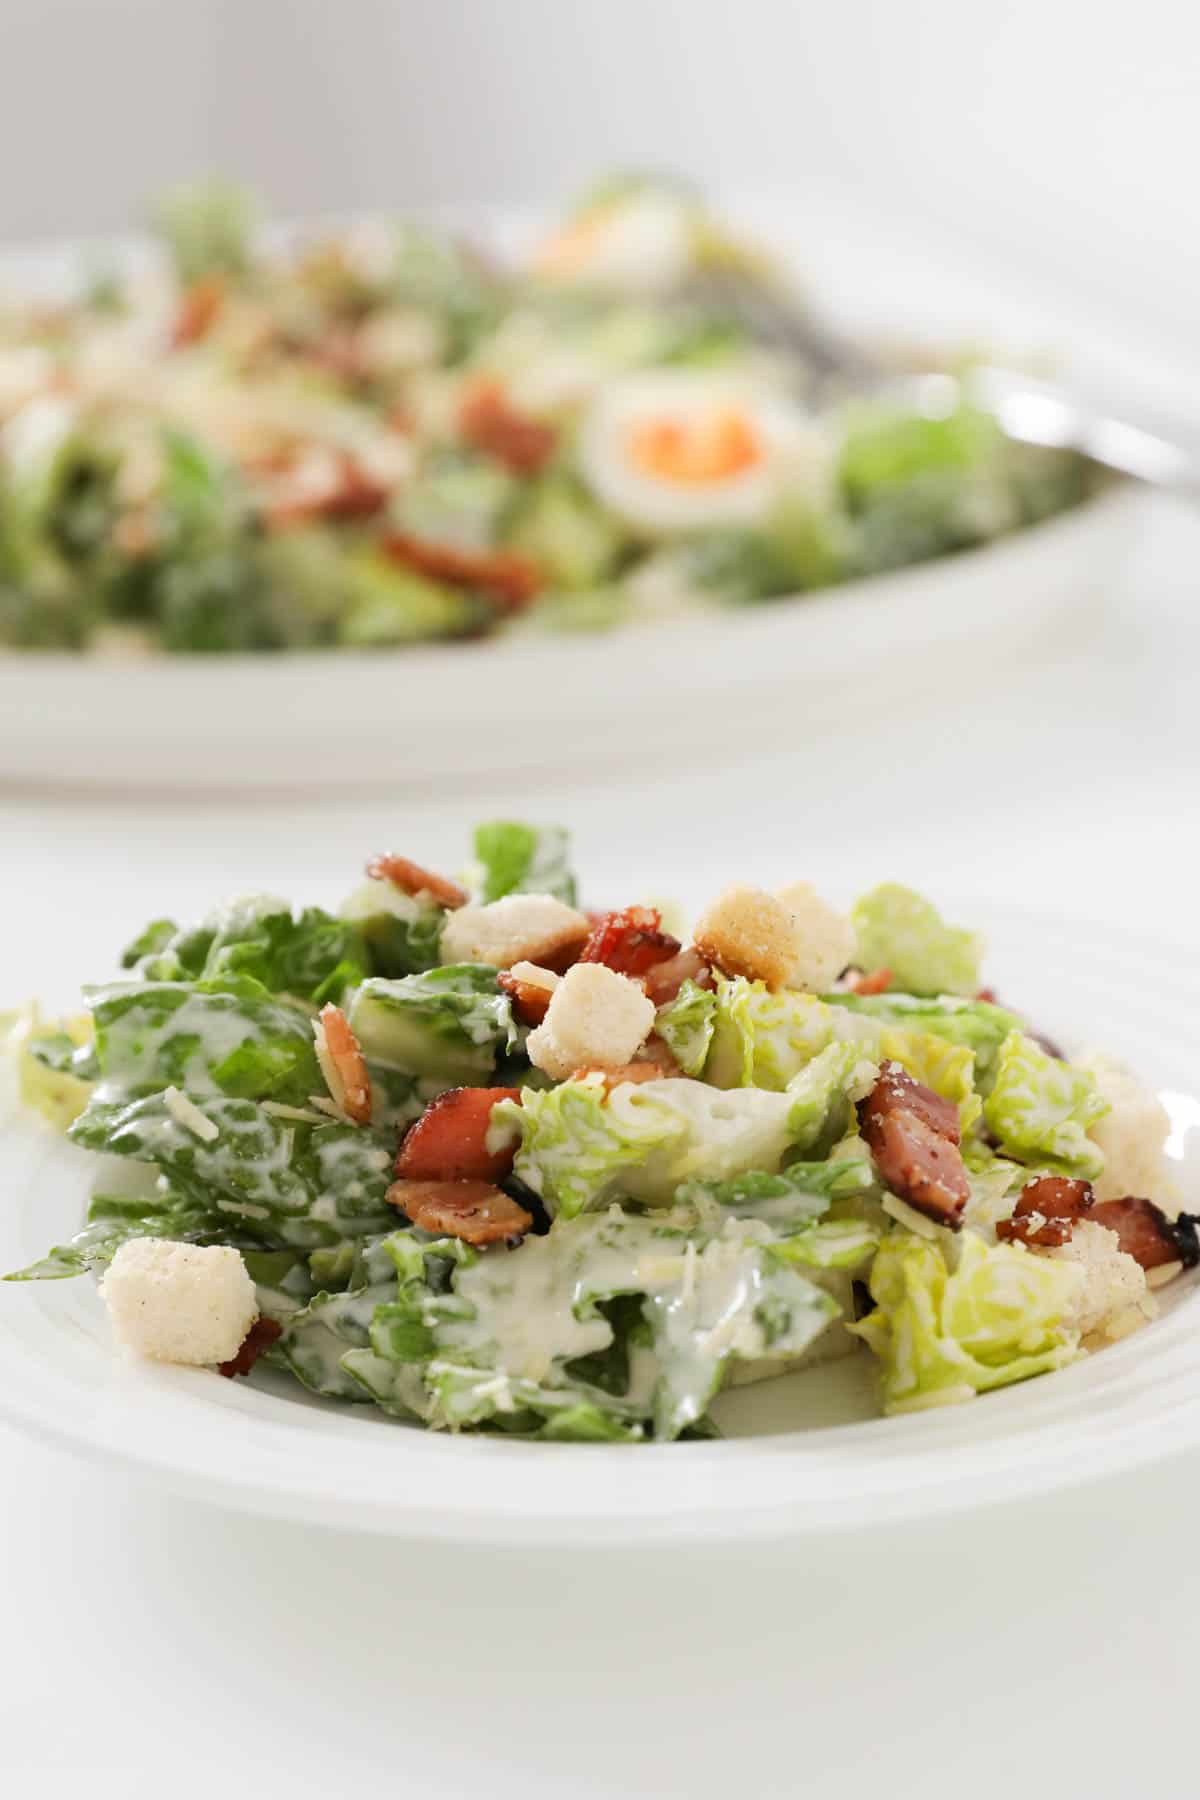 A close up of a plate of Caesar salad.